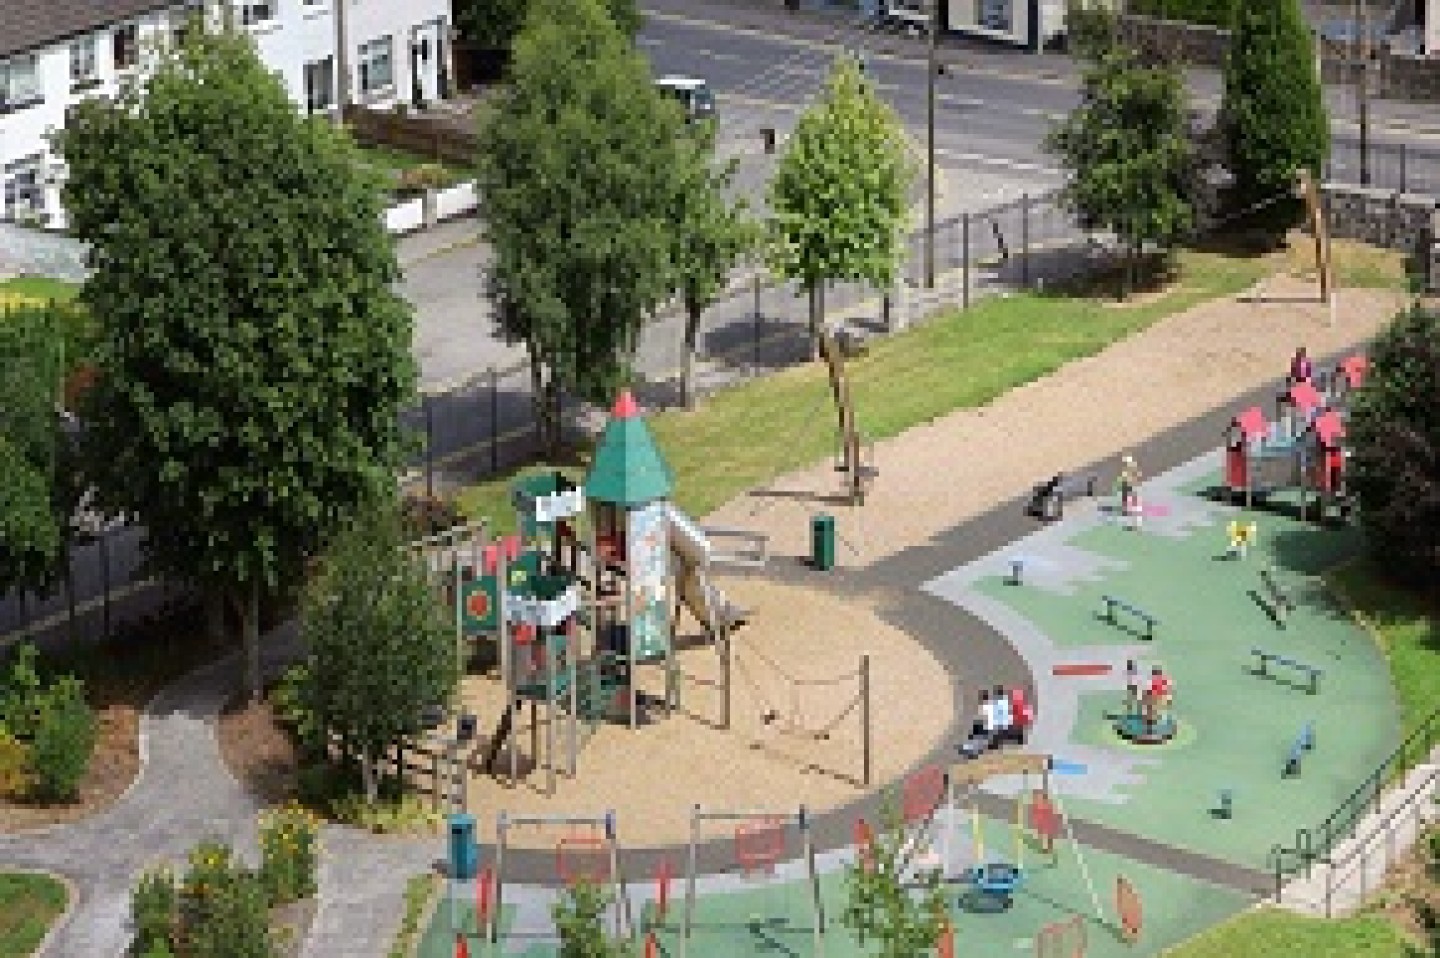 kildare-town-cathedral-playground-featured